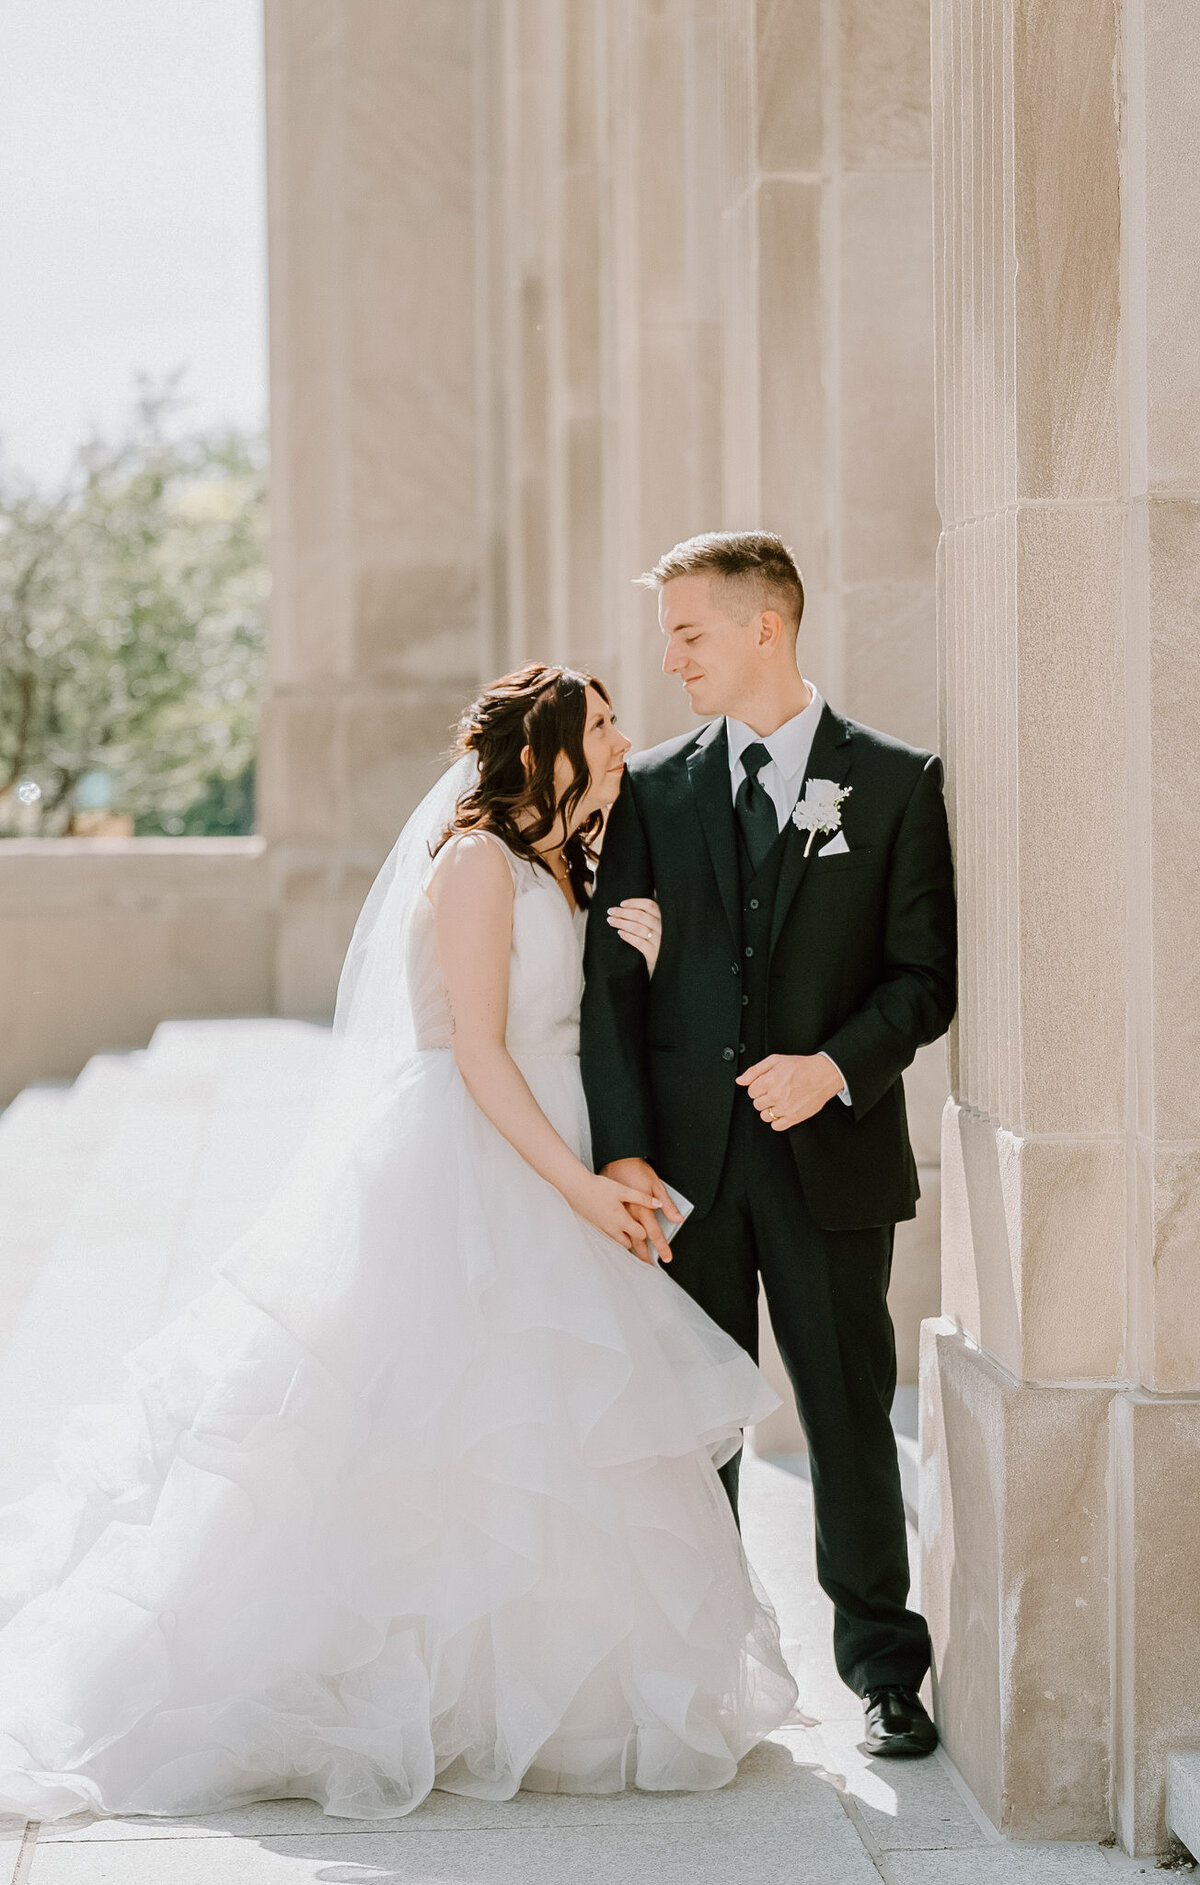 A Downtown Grand Rapids wedding by the DeVos with a West Michigan wedding photographer